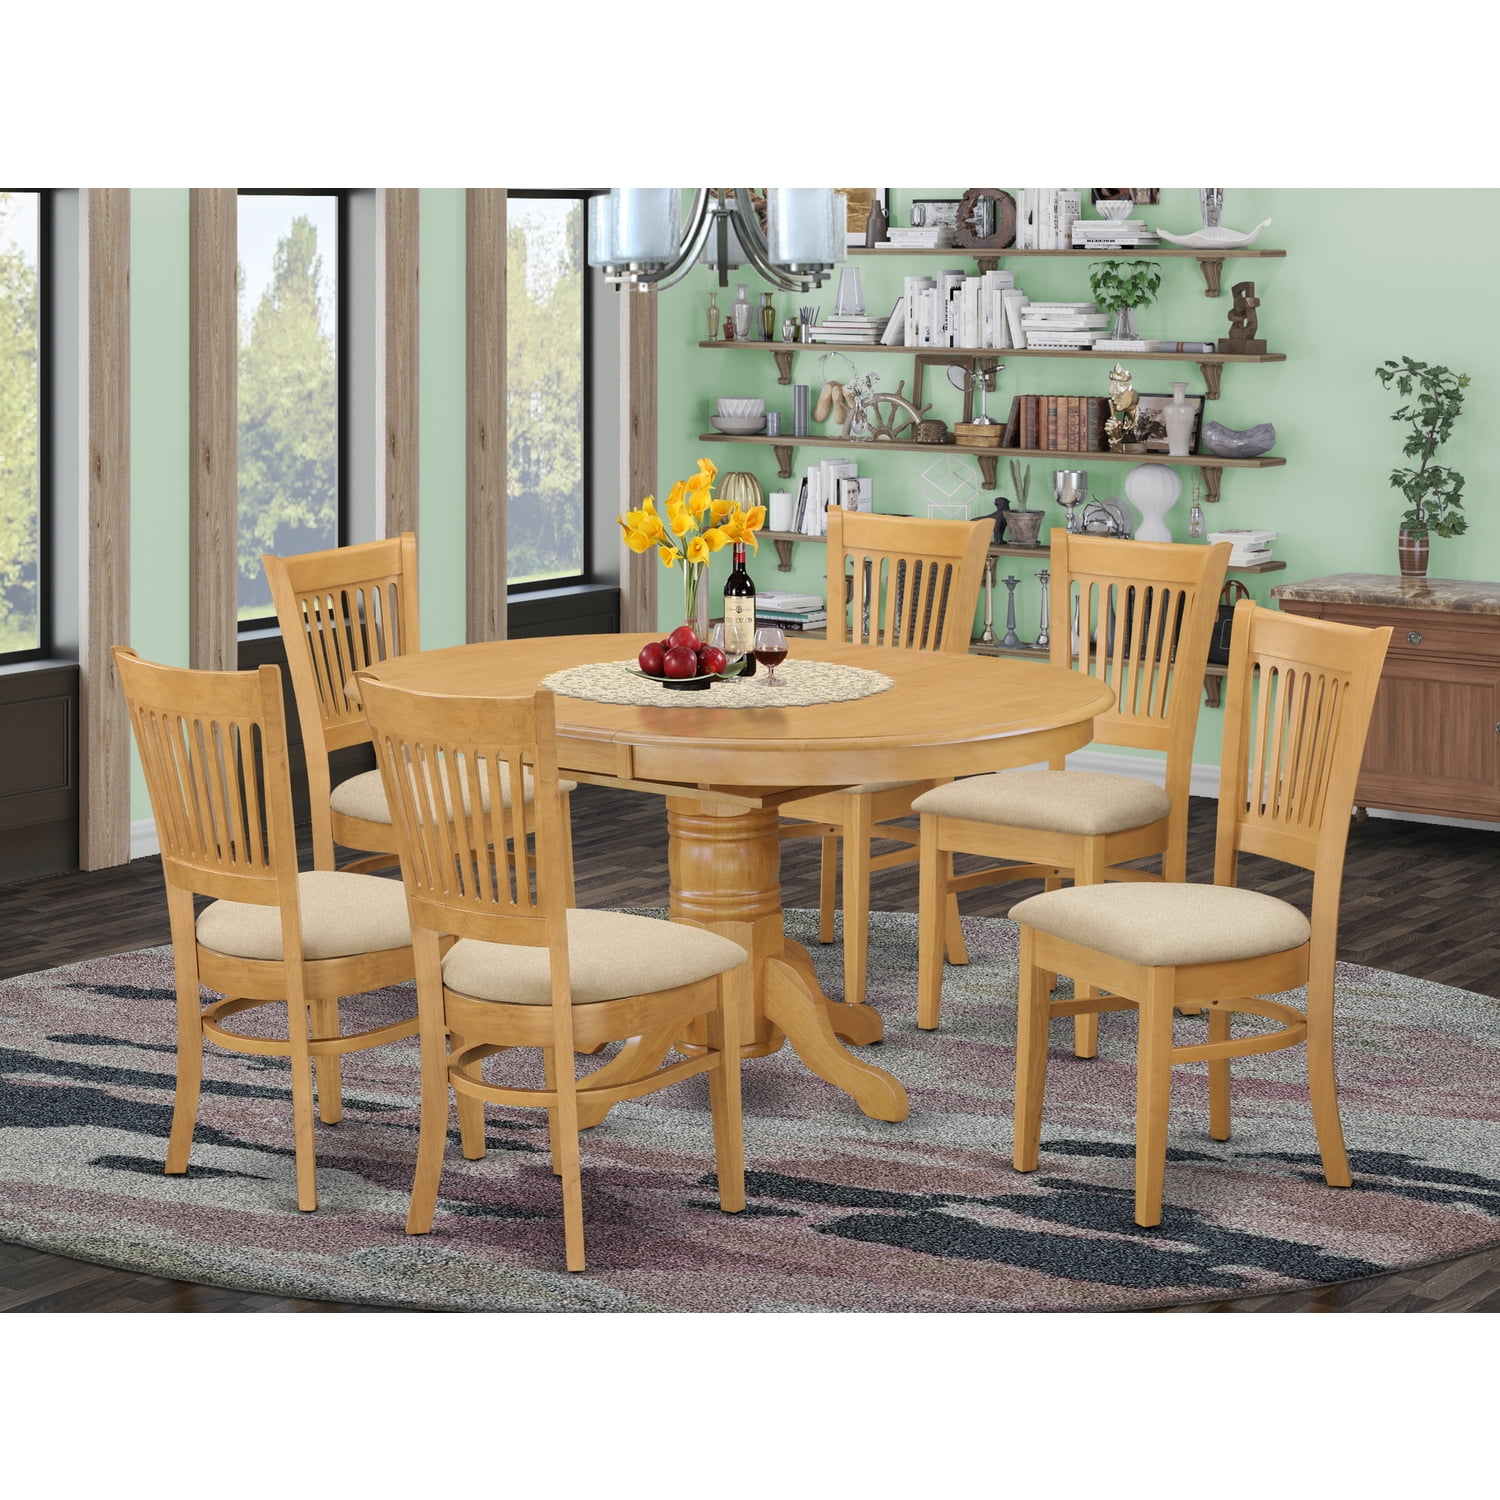 Oak C 7 Pc Dining Set Table, Dining Room Table With Leaf Built In